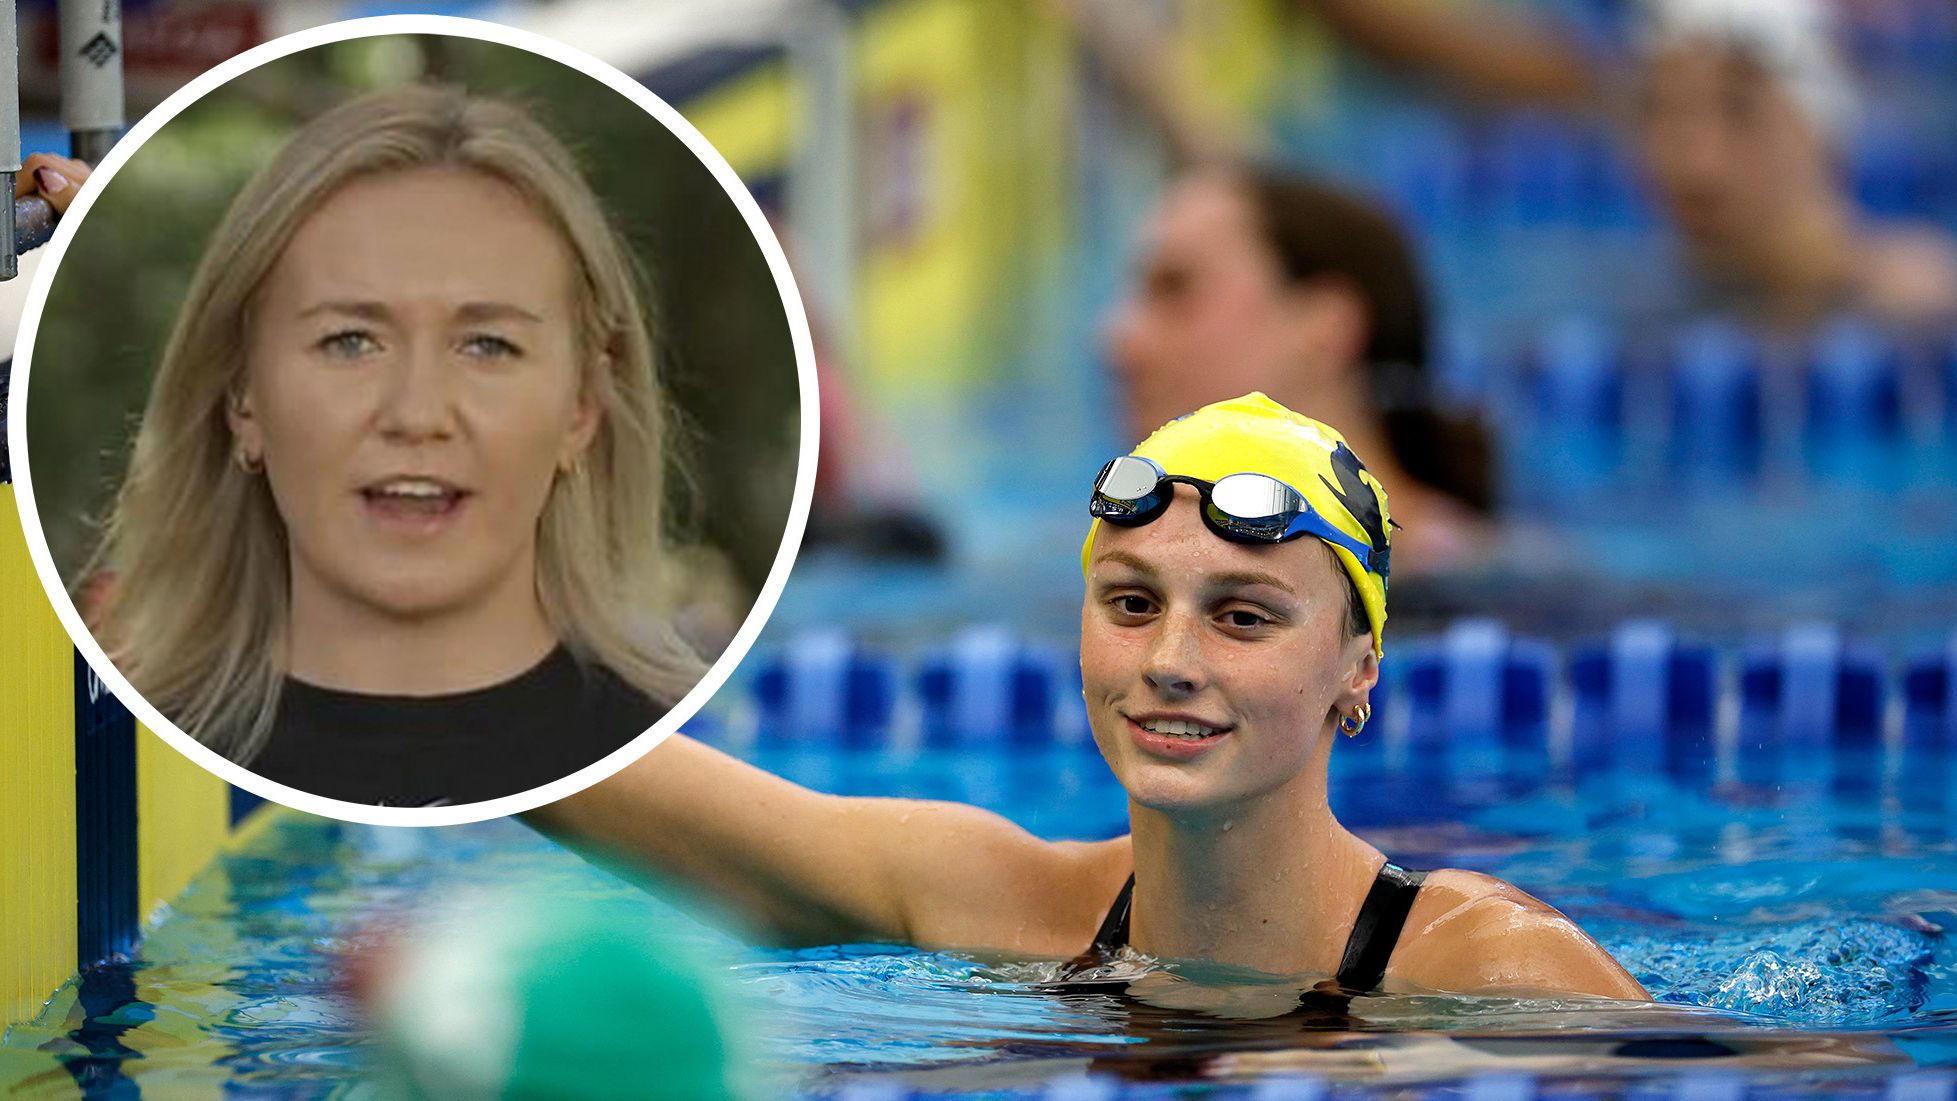 Aussie swim star Ariarne Titmus has responded to Canadian teen Summer McIntosh breaking her 400m freestyle record.